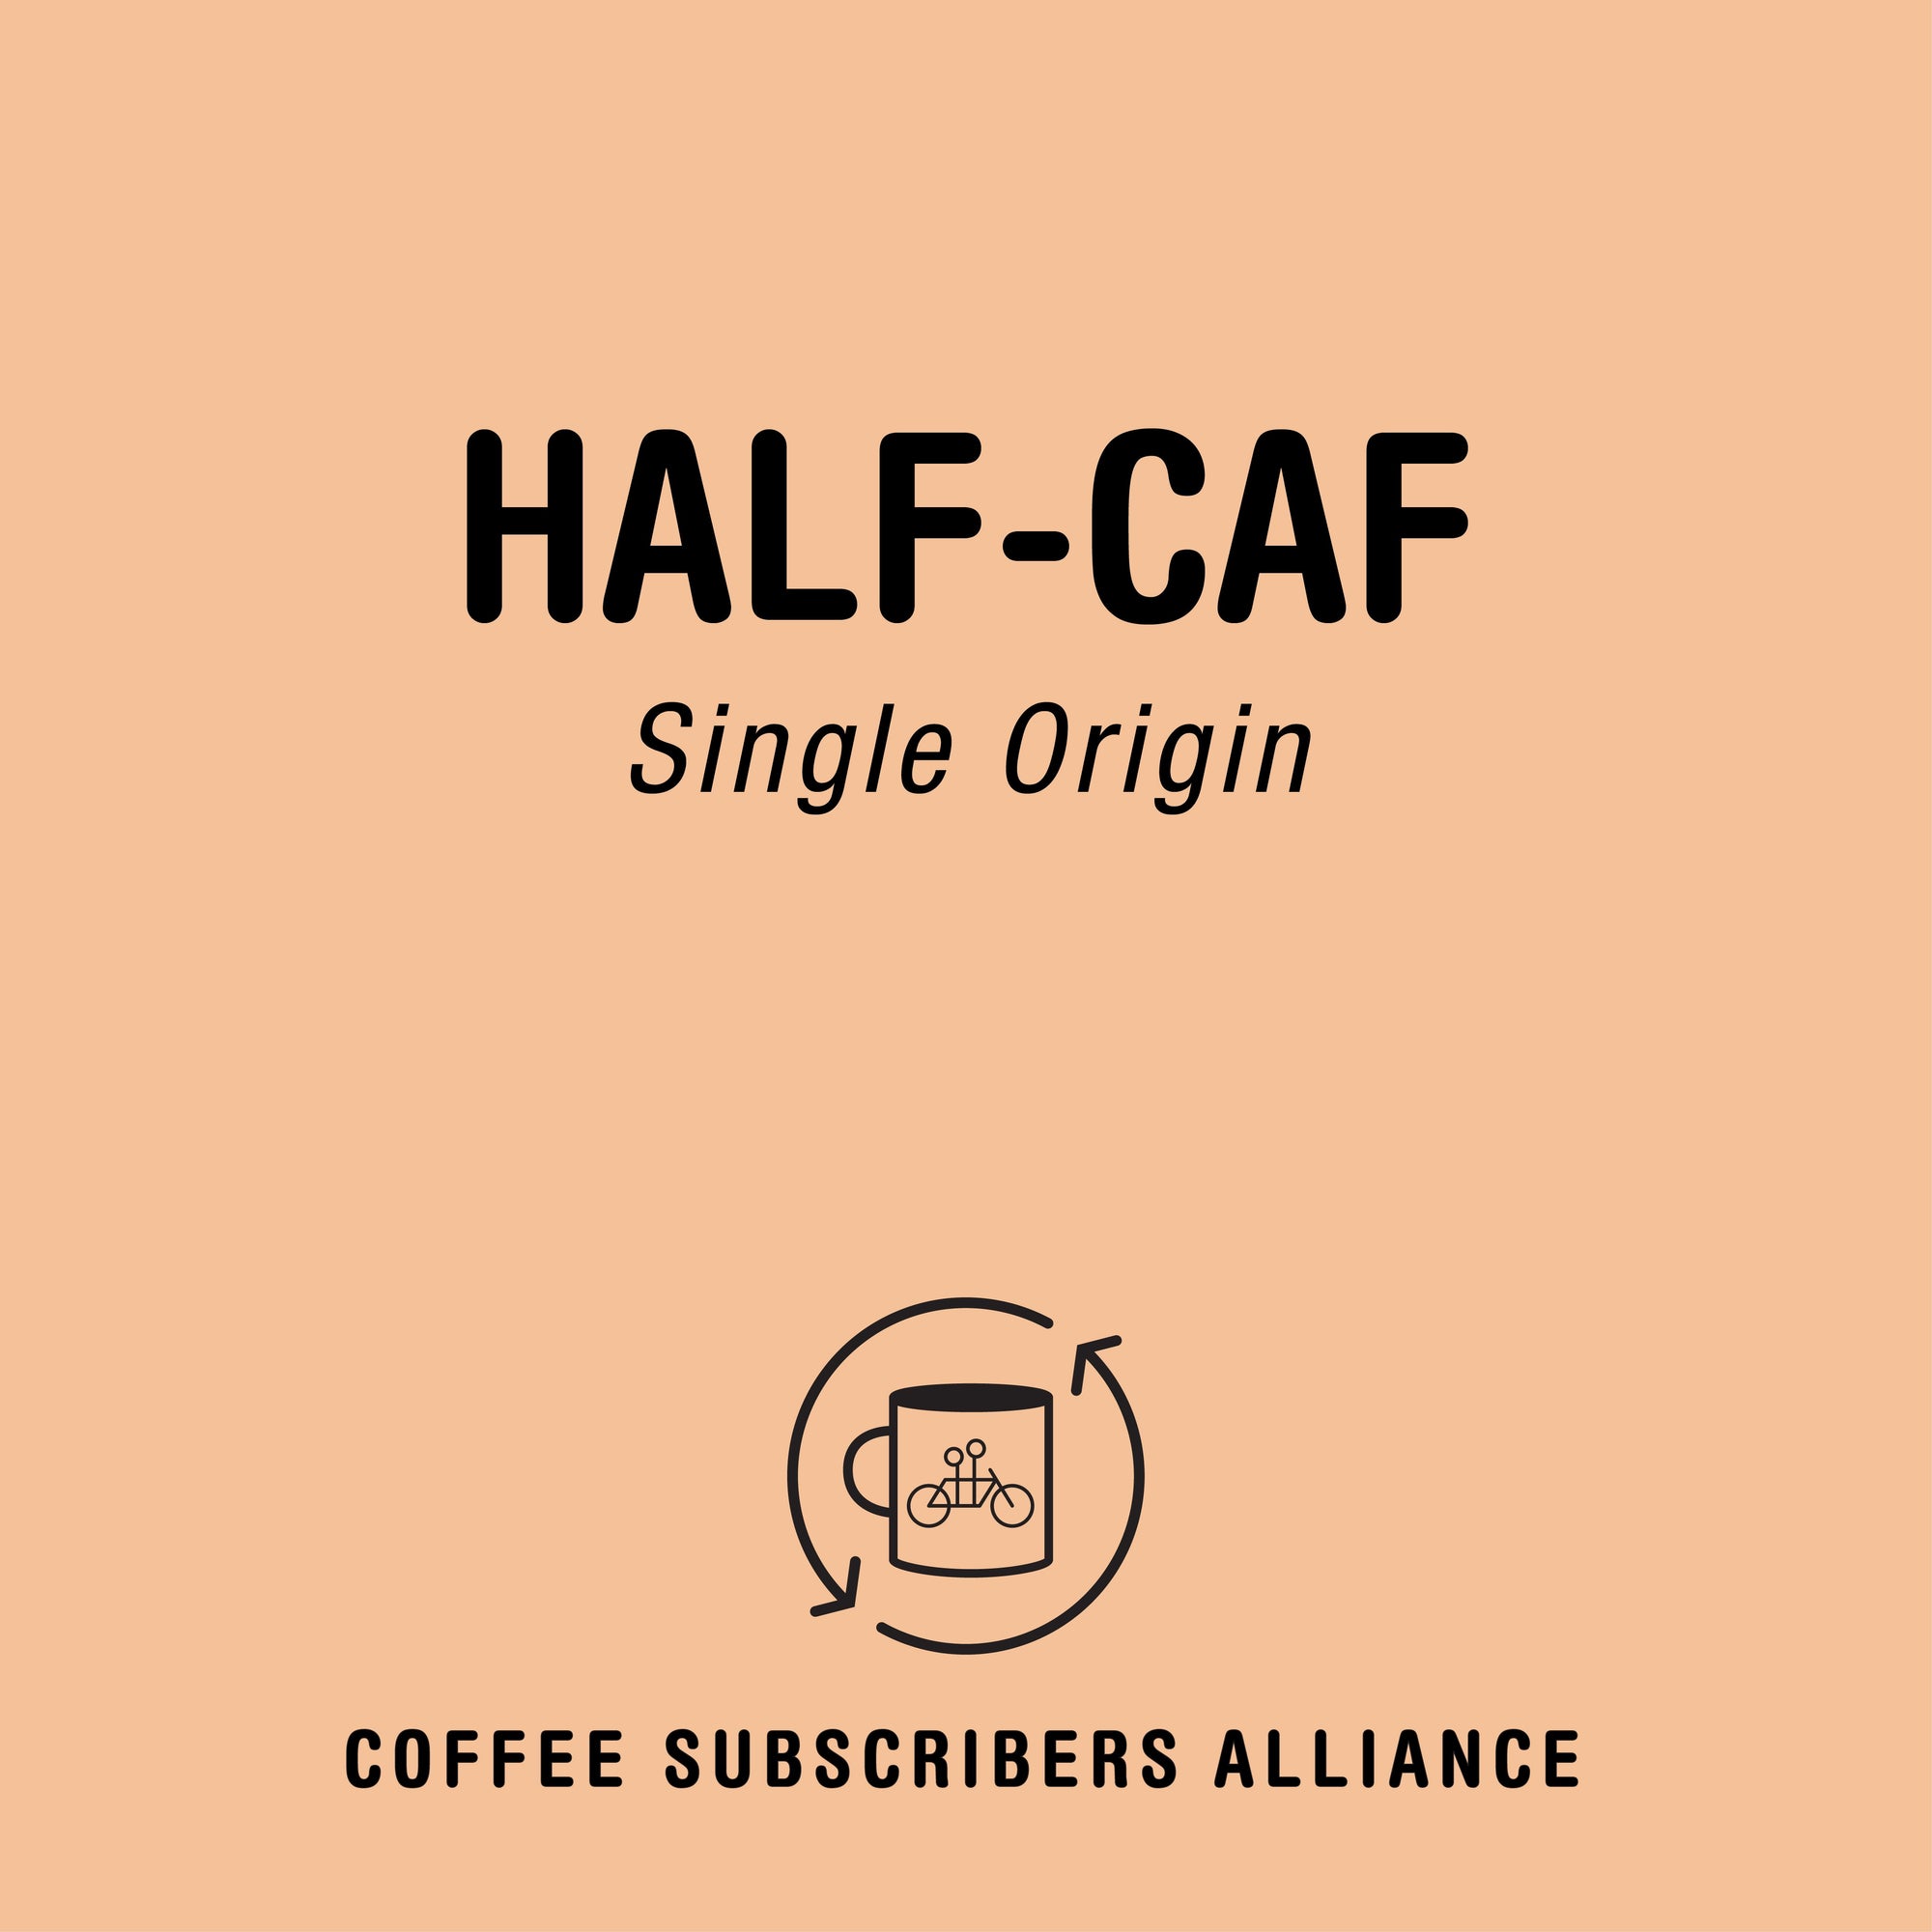 A graphic featuring the text "Half-Caf Subscription Gift 4 Weeks x 3" on a peach background, above the logo of the Tandem coffee subscribers alliance which includes a coffee cup icon surrounded by a circular frame.